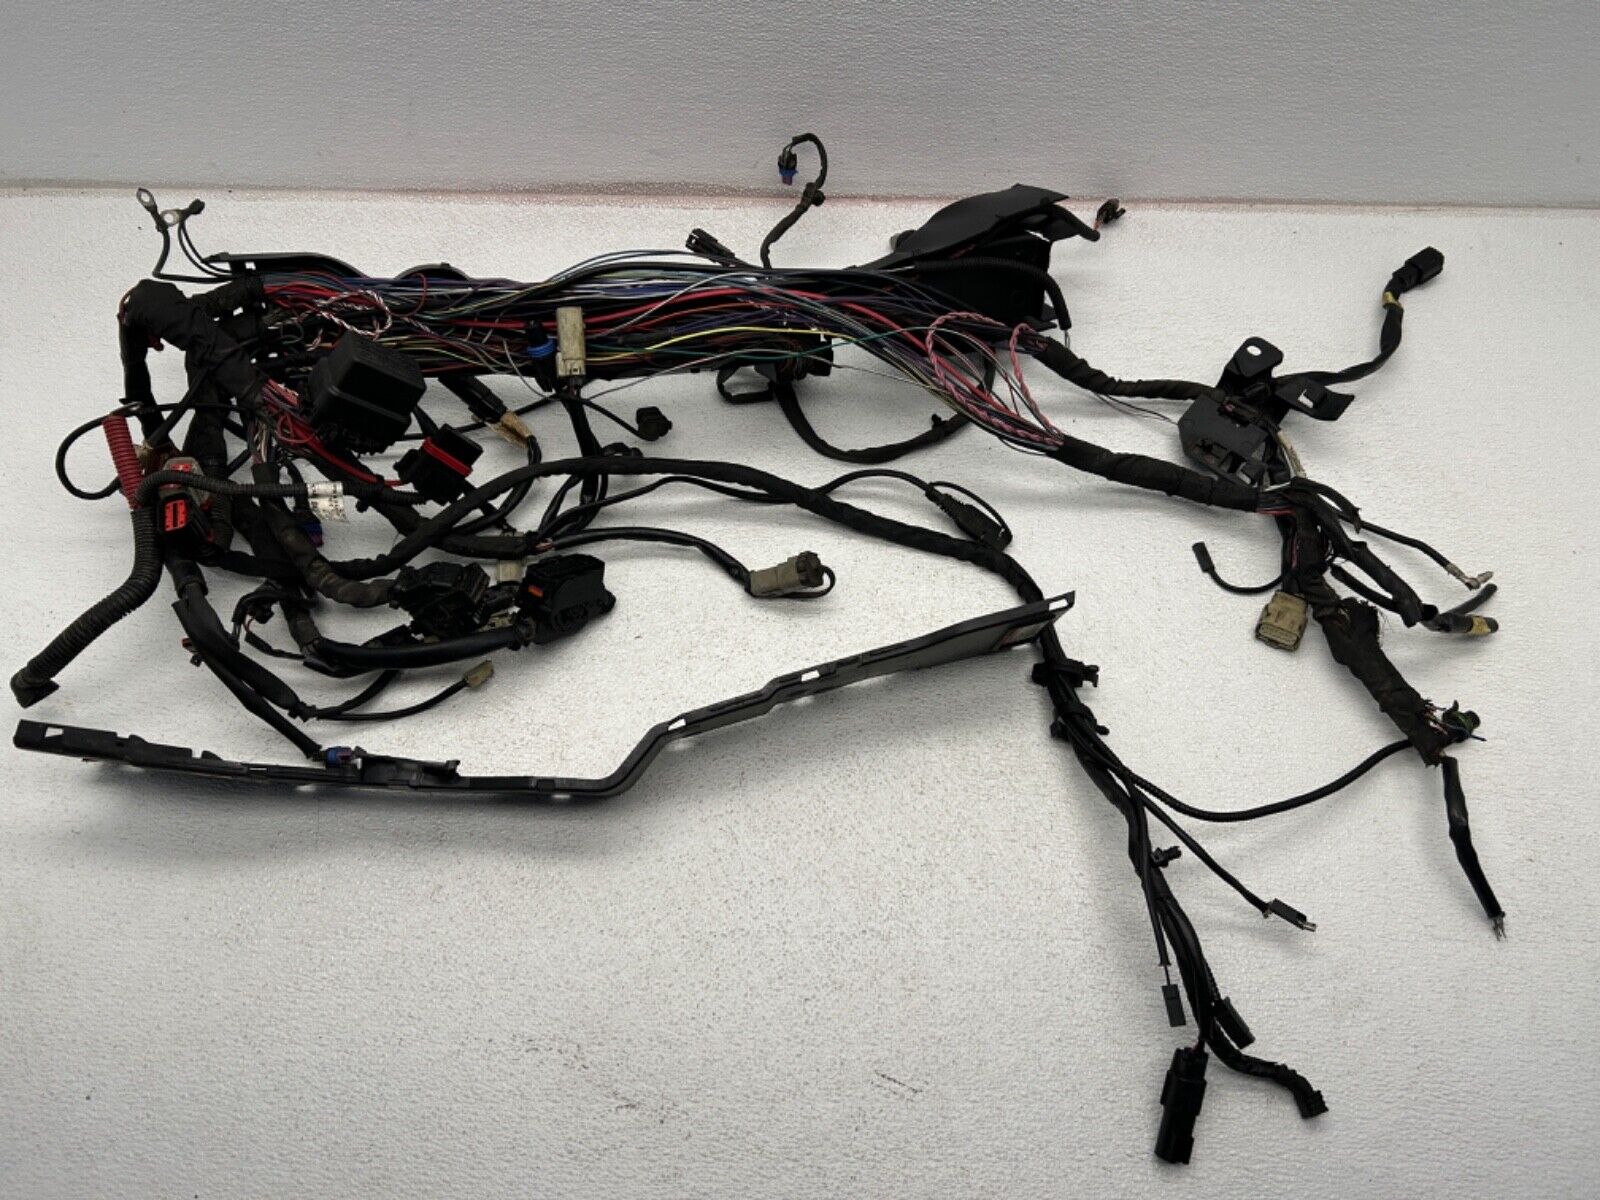 14-16 HARLEY TOURING ROAD ELECTRA STREET MAIN WIRING HARNESS W/ABS 69201317